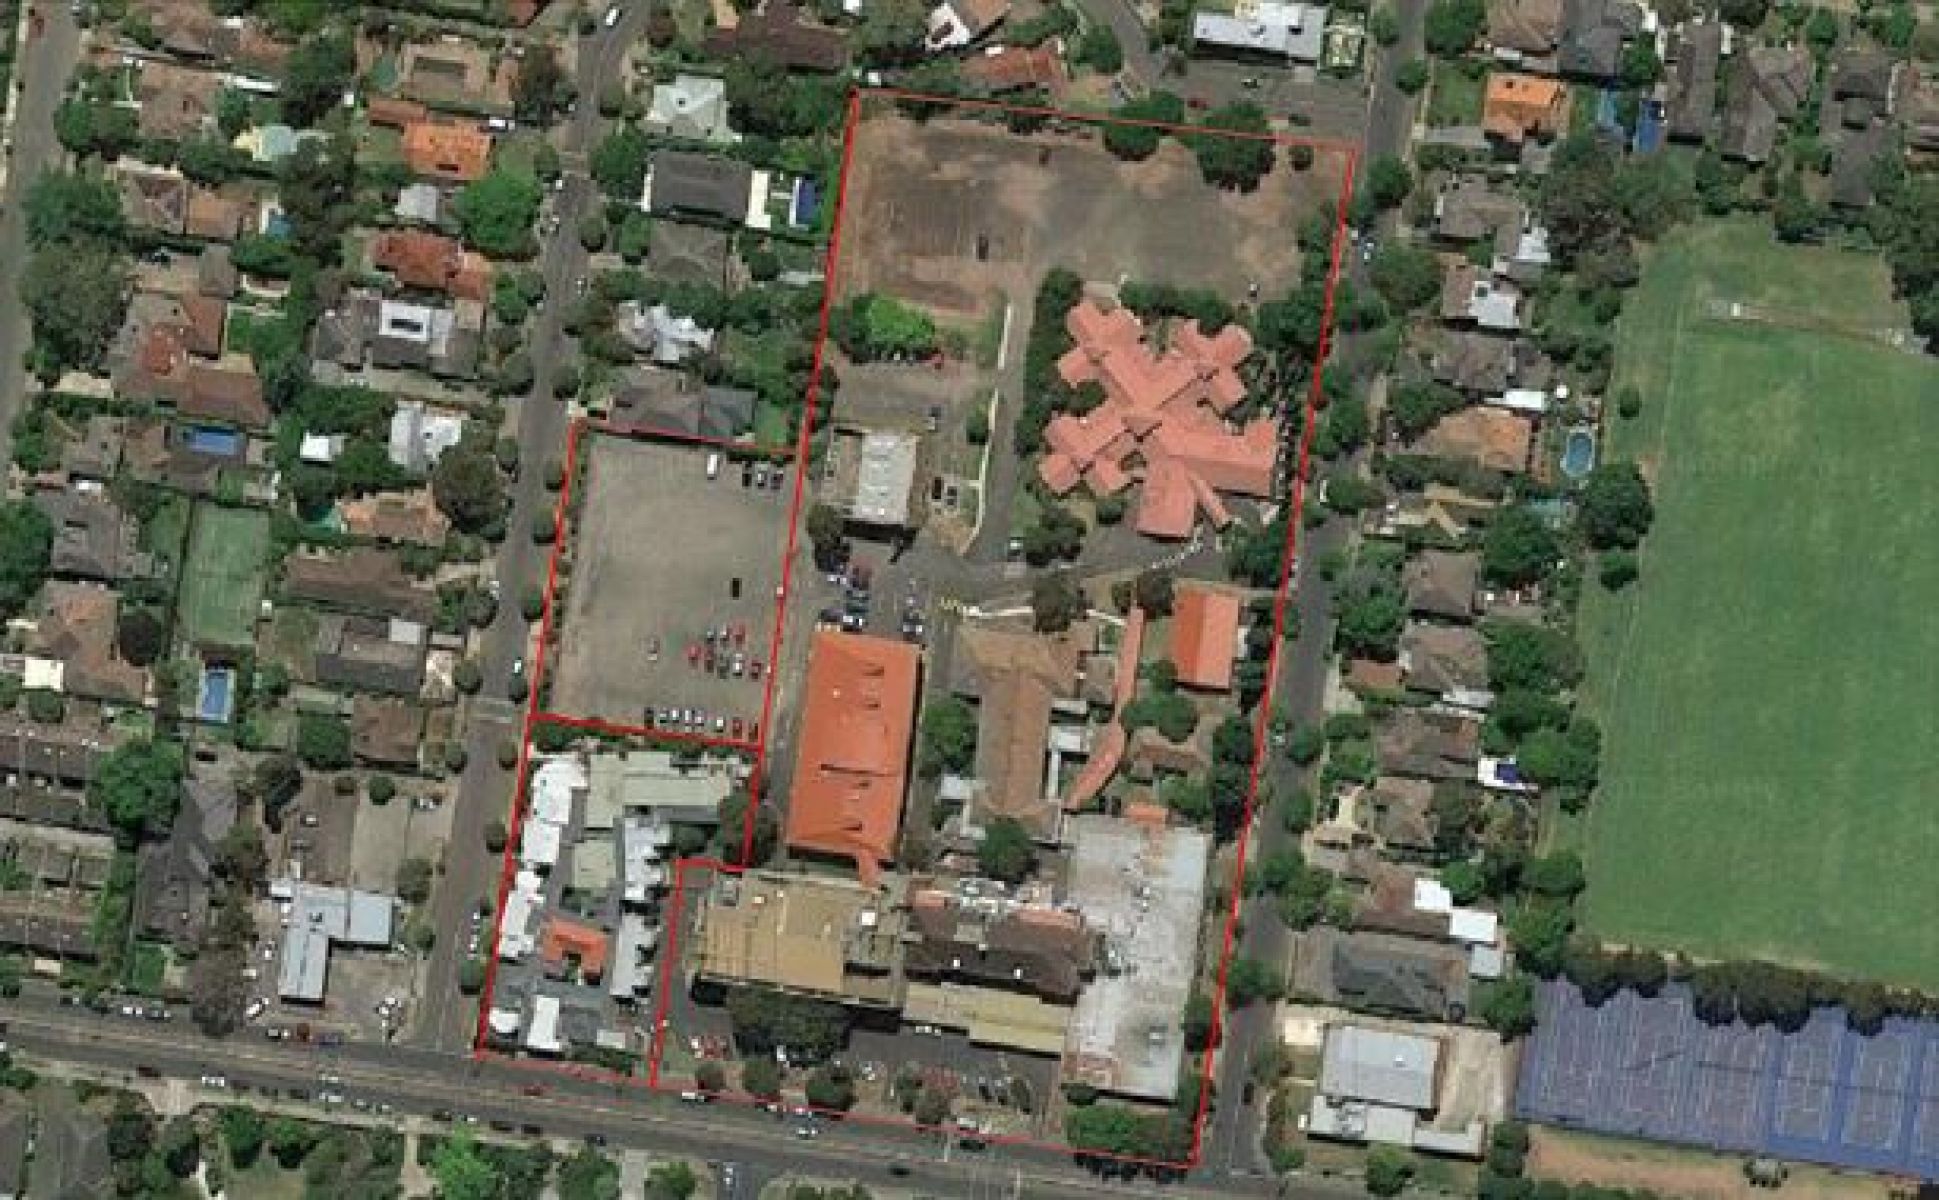 Aerial view of St Georges Hospital